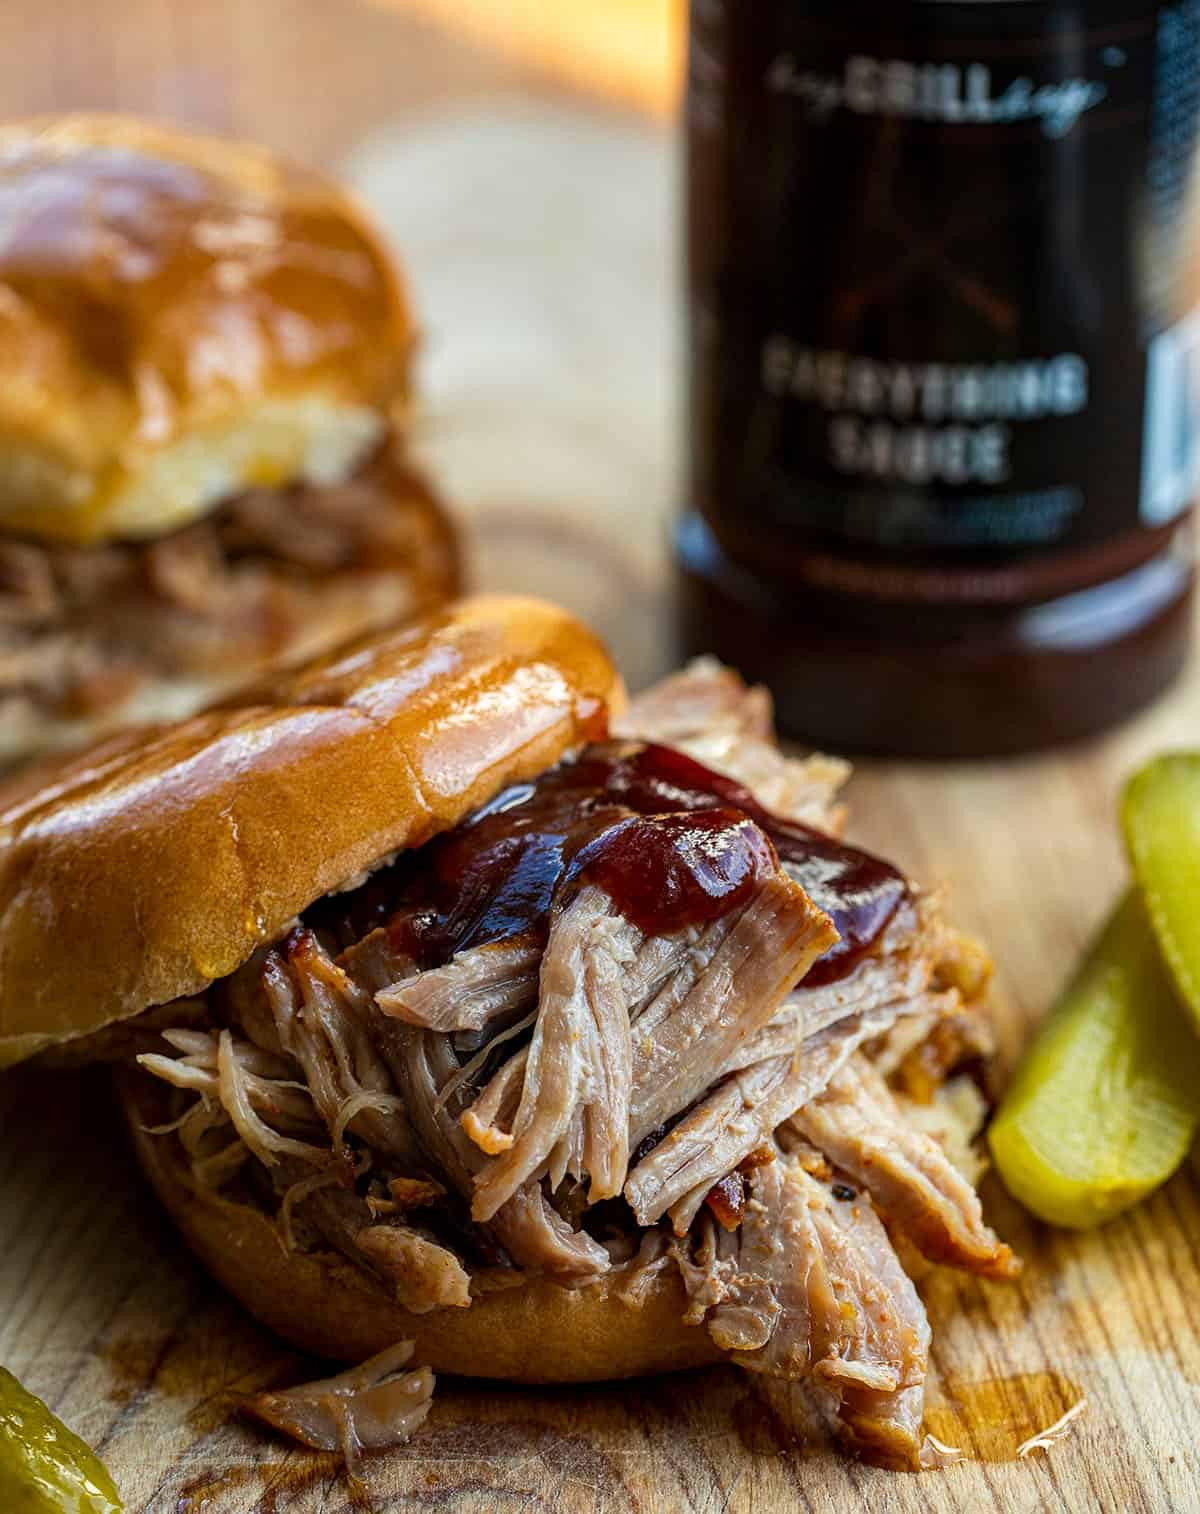 Pulled Pork Sandwich with Pickles and BBQ Sauce